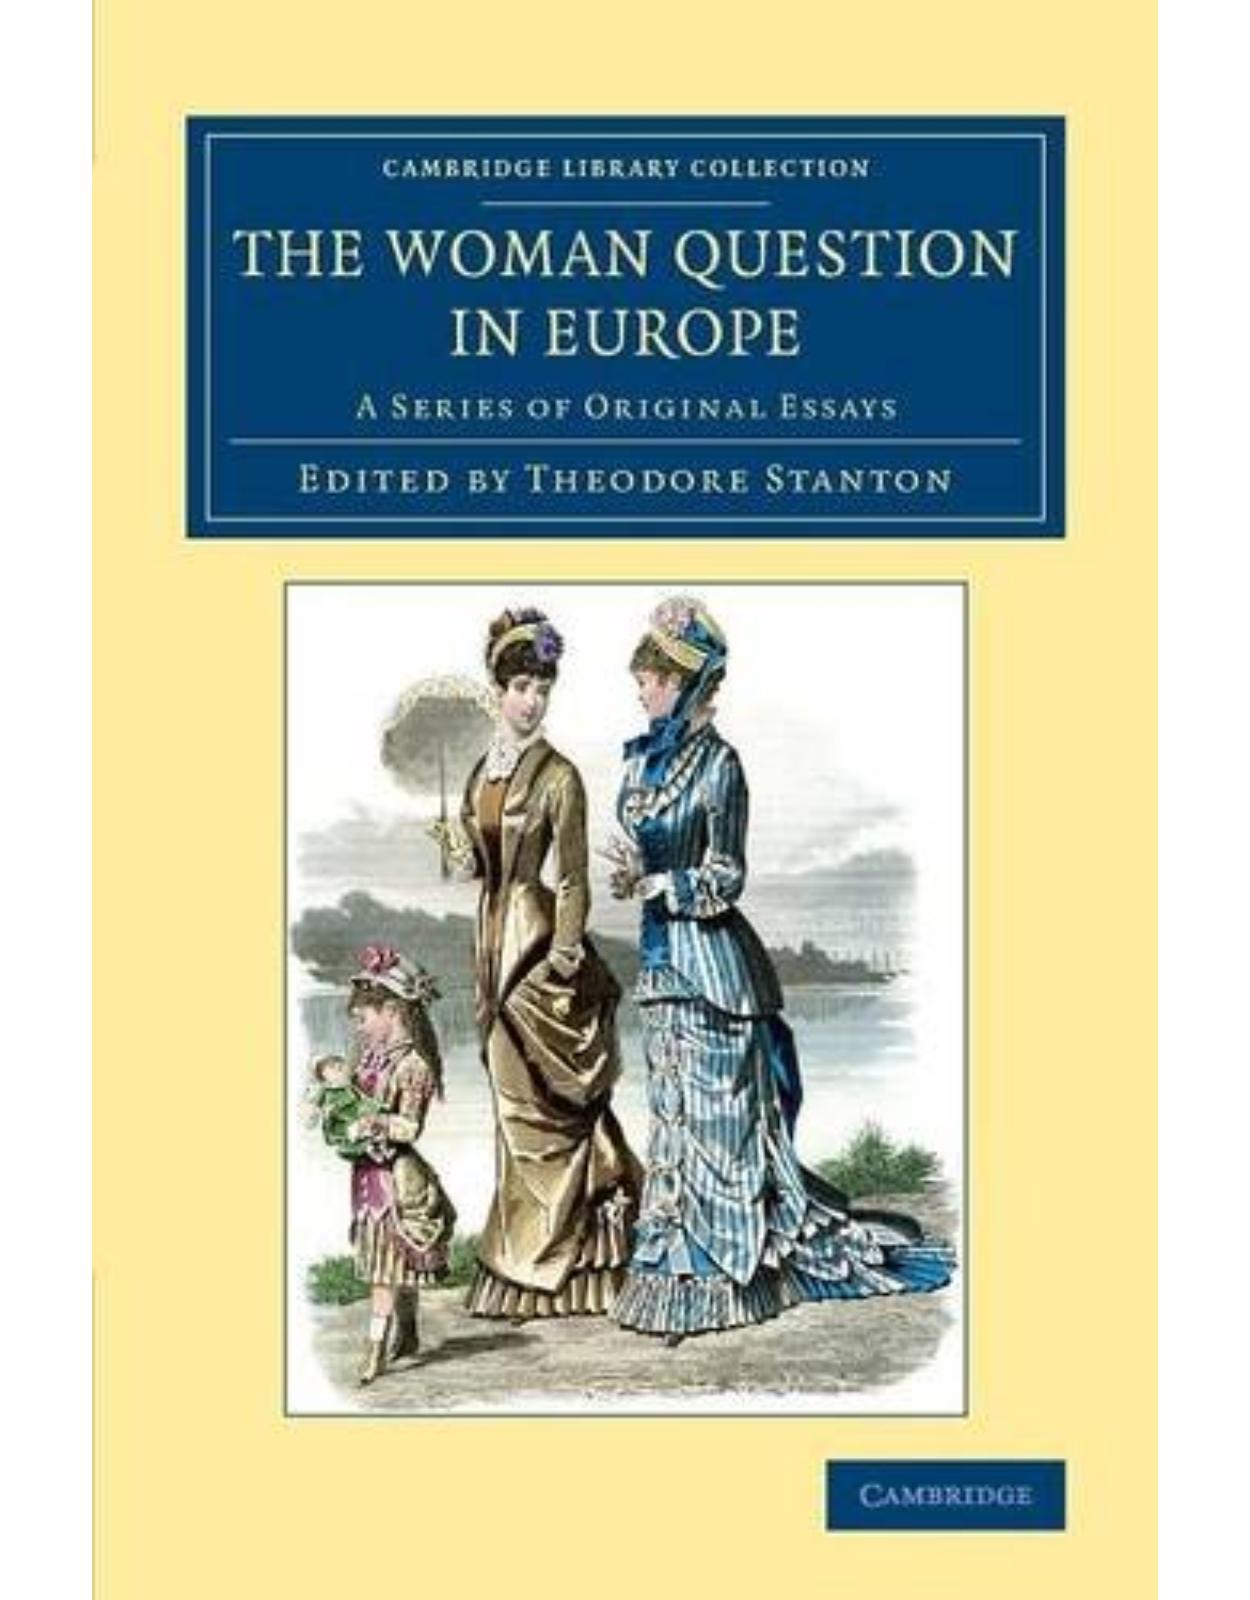 The Woman Question in Europe: A Series of Original Essays (Cambridge Library Collection - Education)